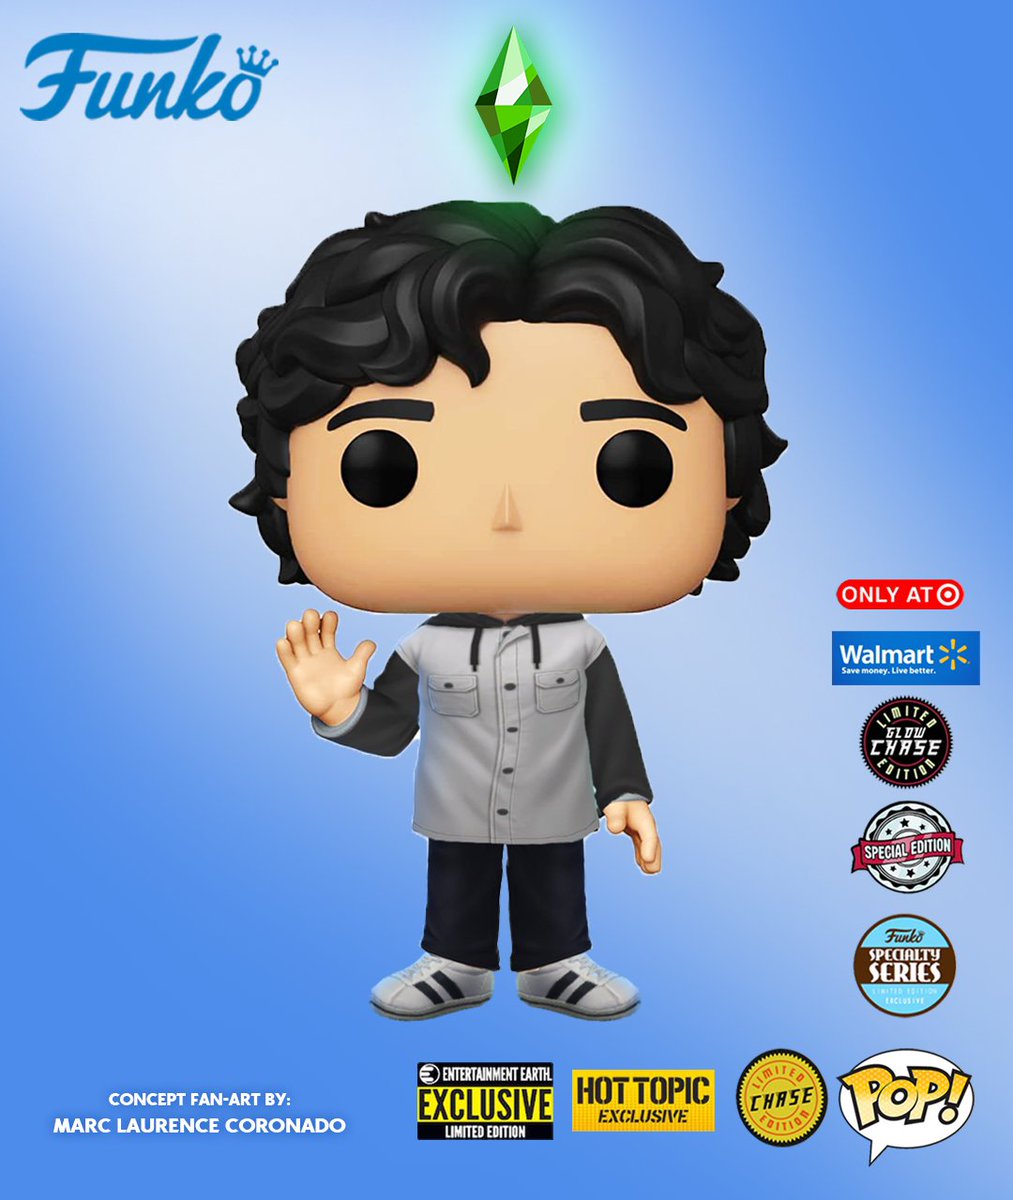 CONCEPT FAN-ART for today. @LuddySimmer as a Funko Pop! @TheSims x @OriginalFunko 🙏🏻 #thesims #sims4 #funko #funkopop #concept #fanart #luddysimmer